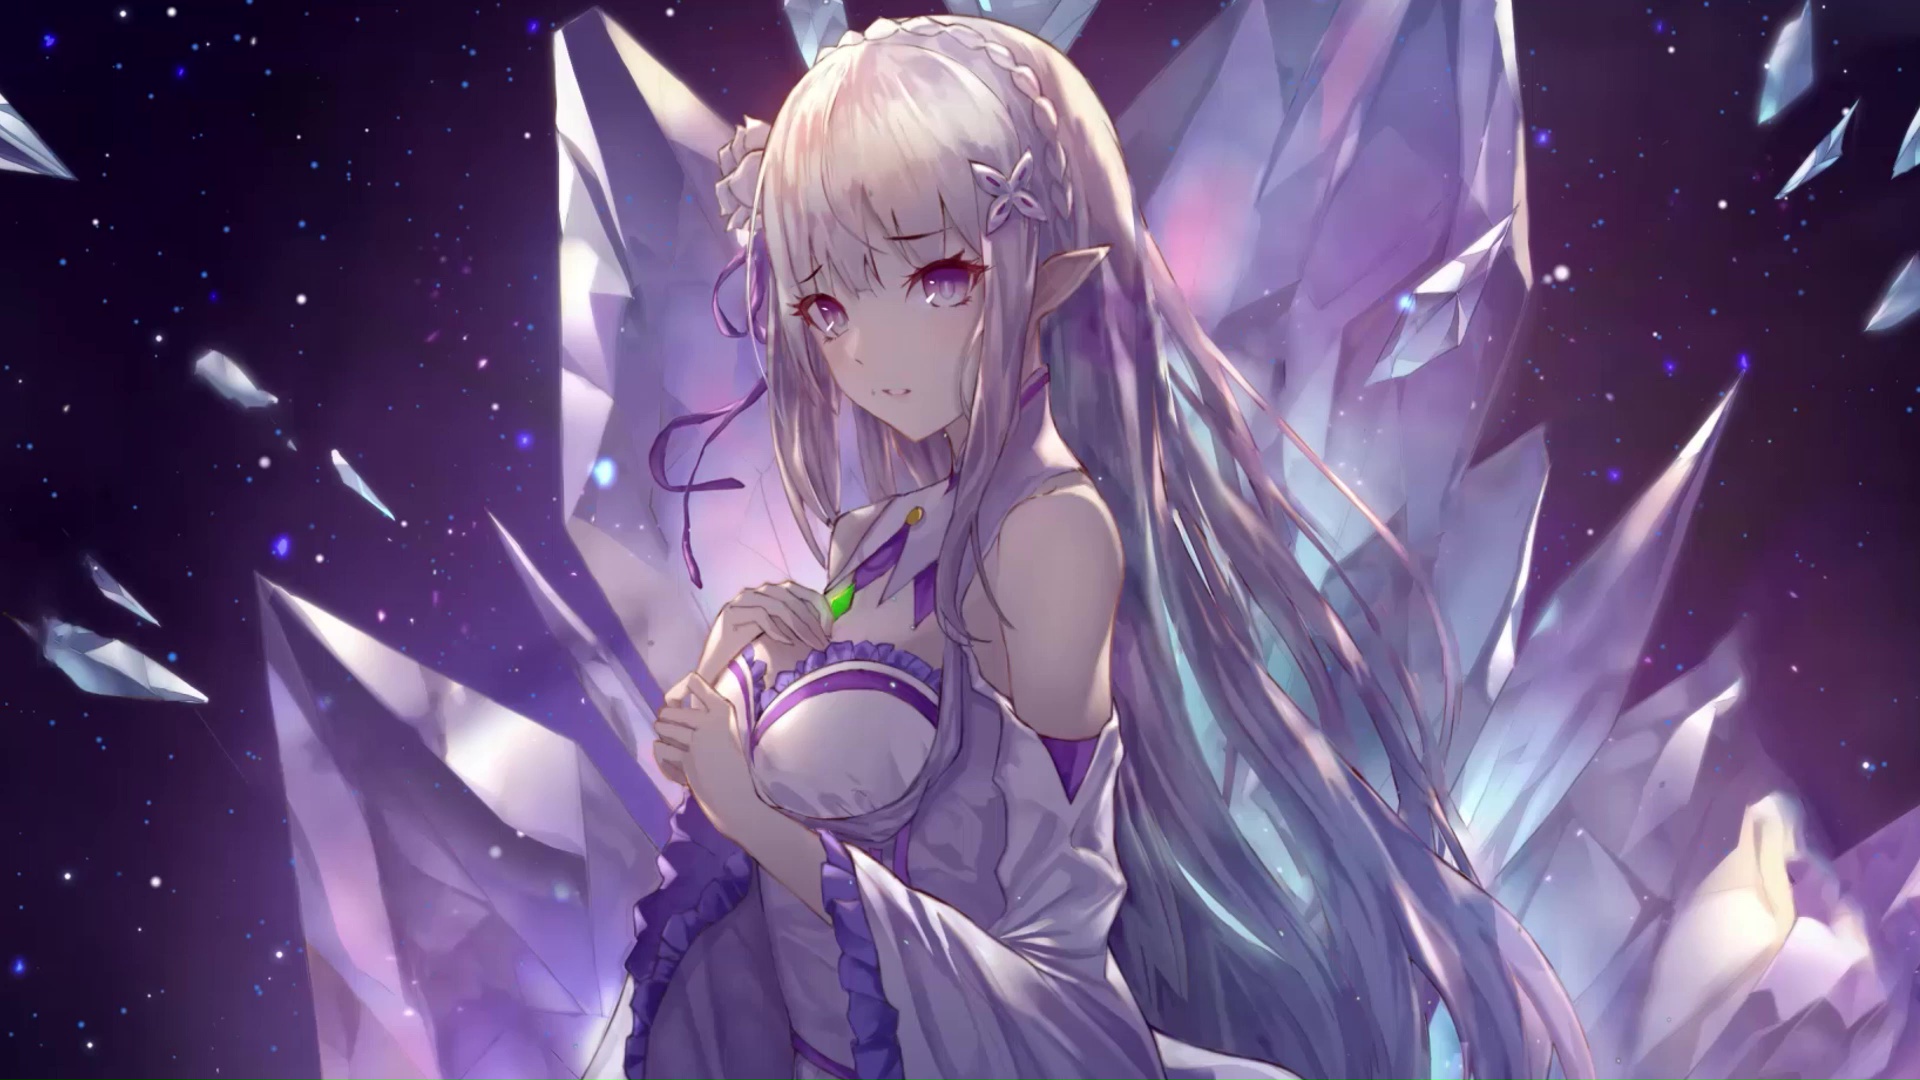 15 Emilia Live Wallpapers, Animated Wallpapers - MoeWalls